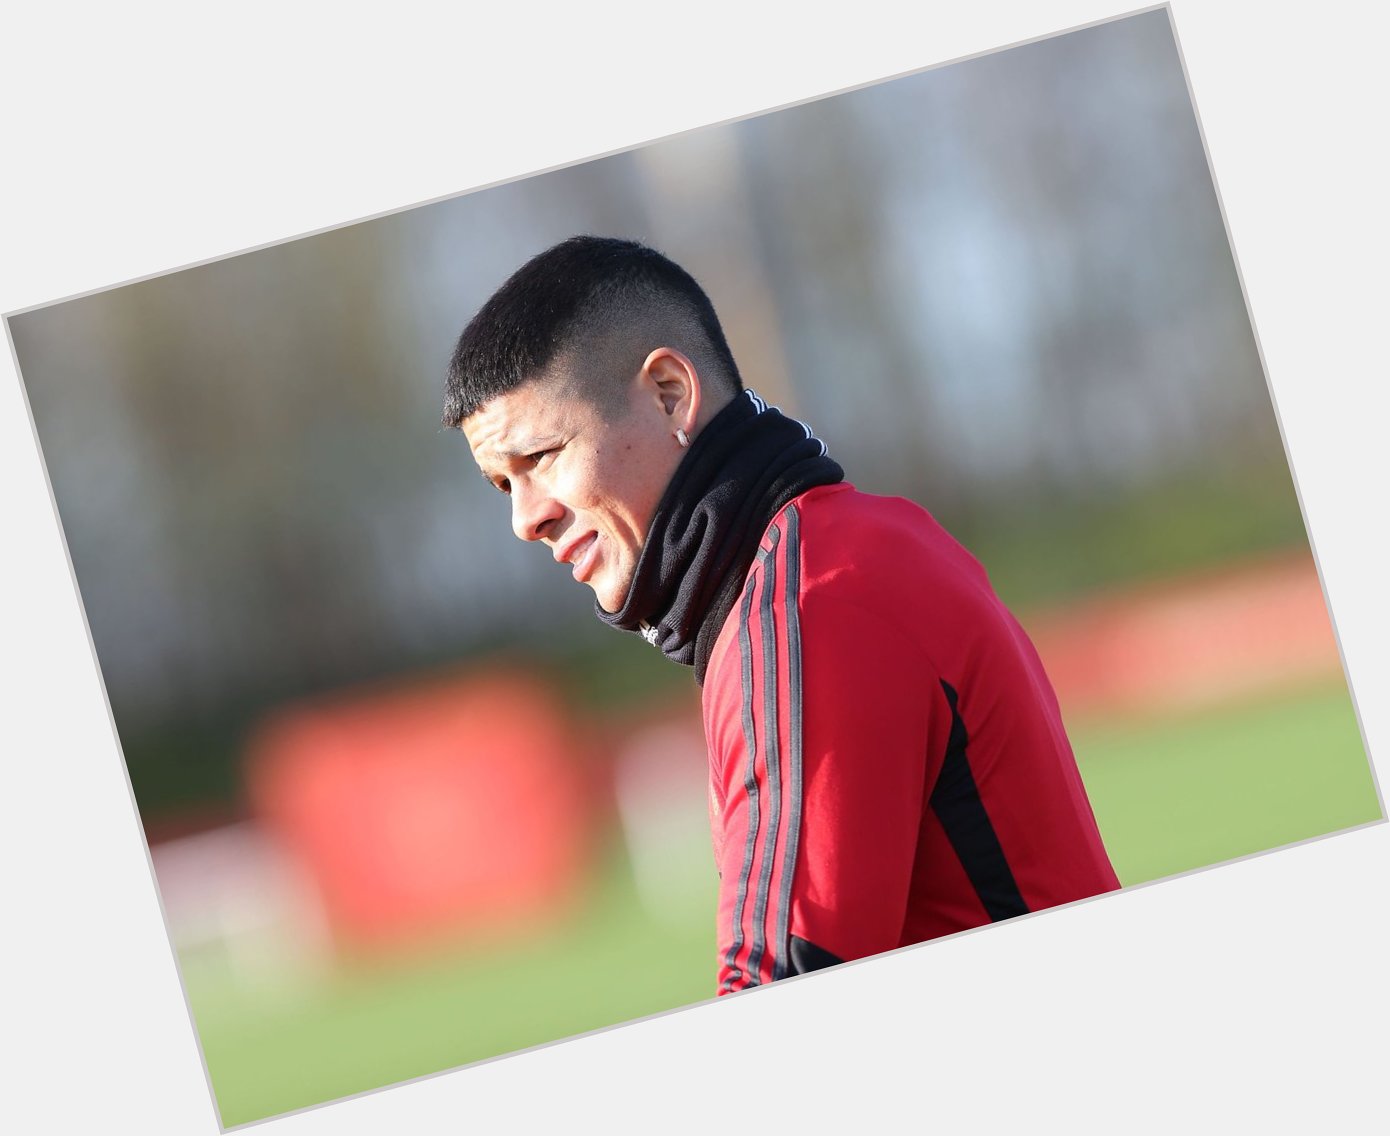 Happy Birthday Marcos Rojo    Miss you at Manchester United Idolo 